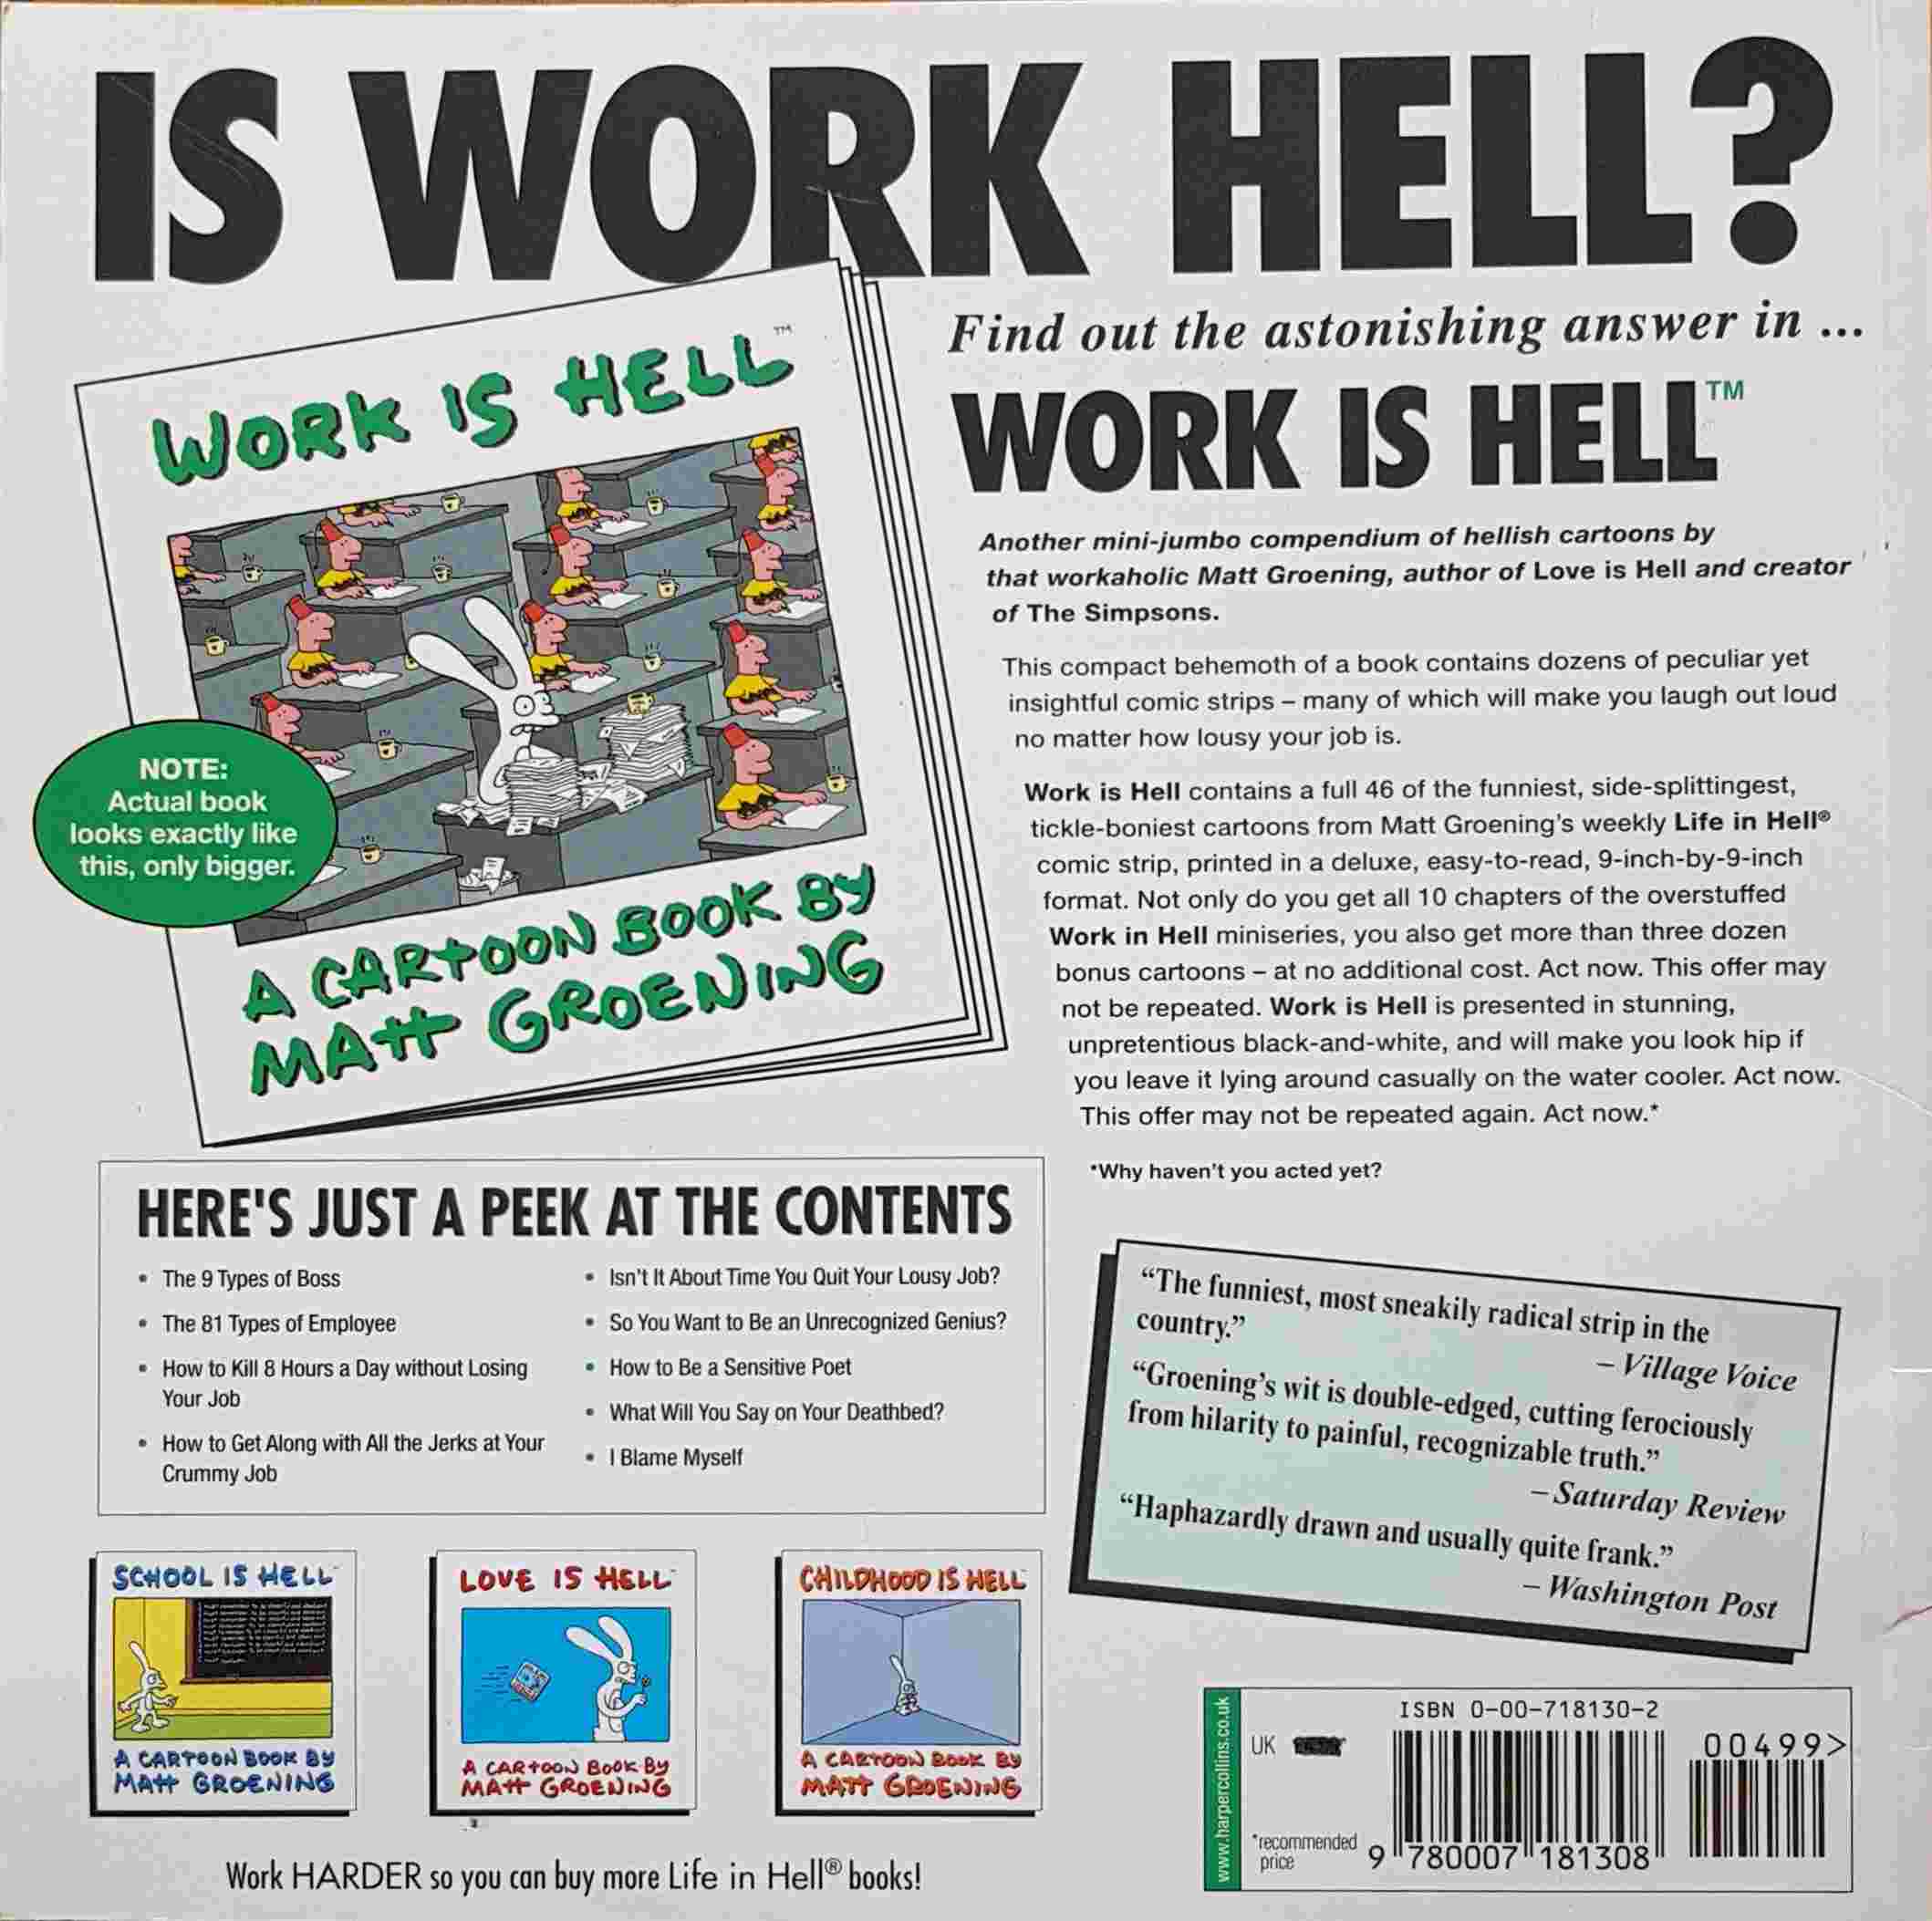 Picture of 0-00-718130-2 Work is hell by artist Matt Groening from ITV, Channel 4 and Channel 5 library